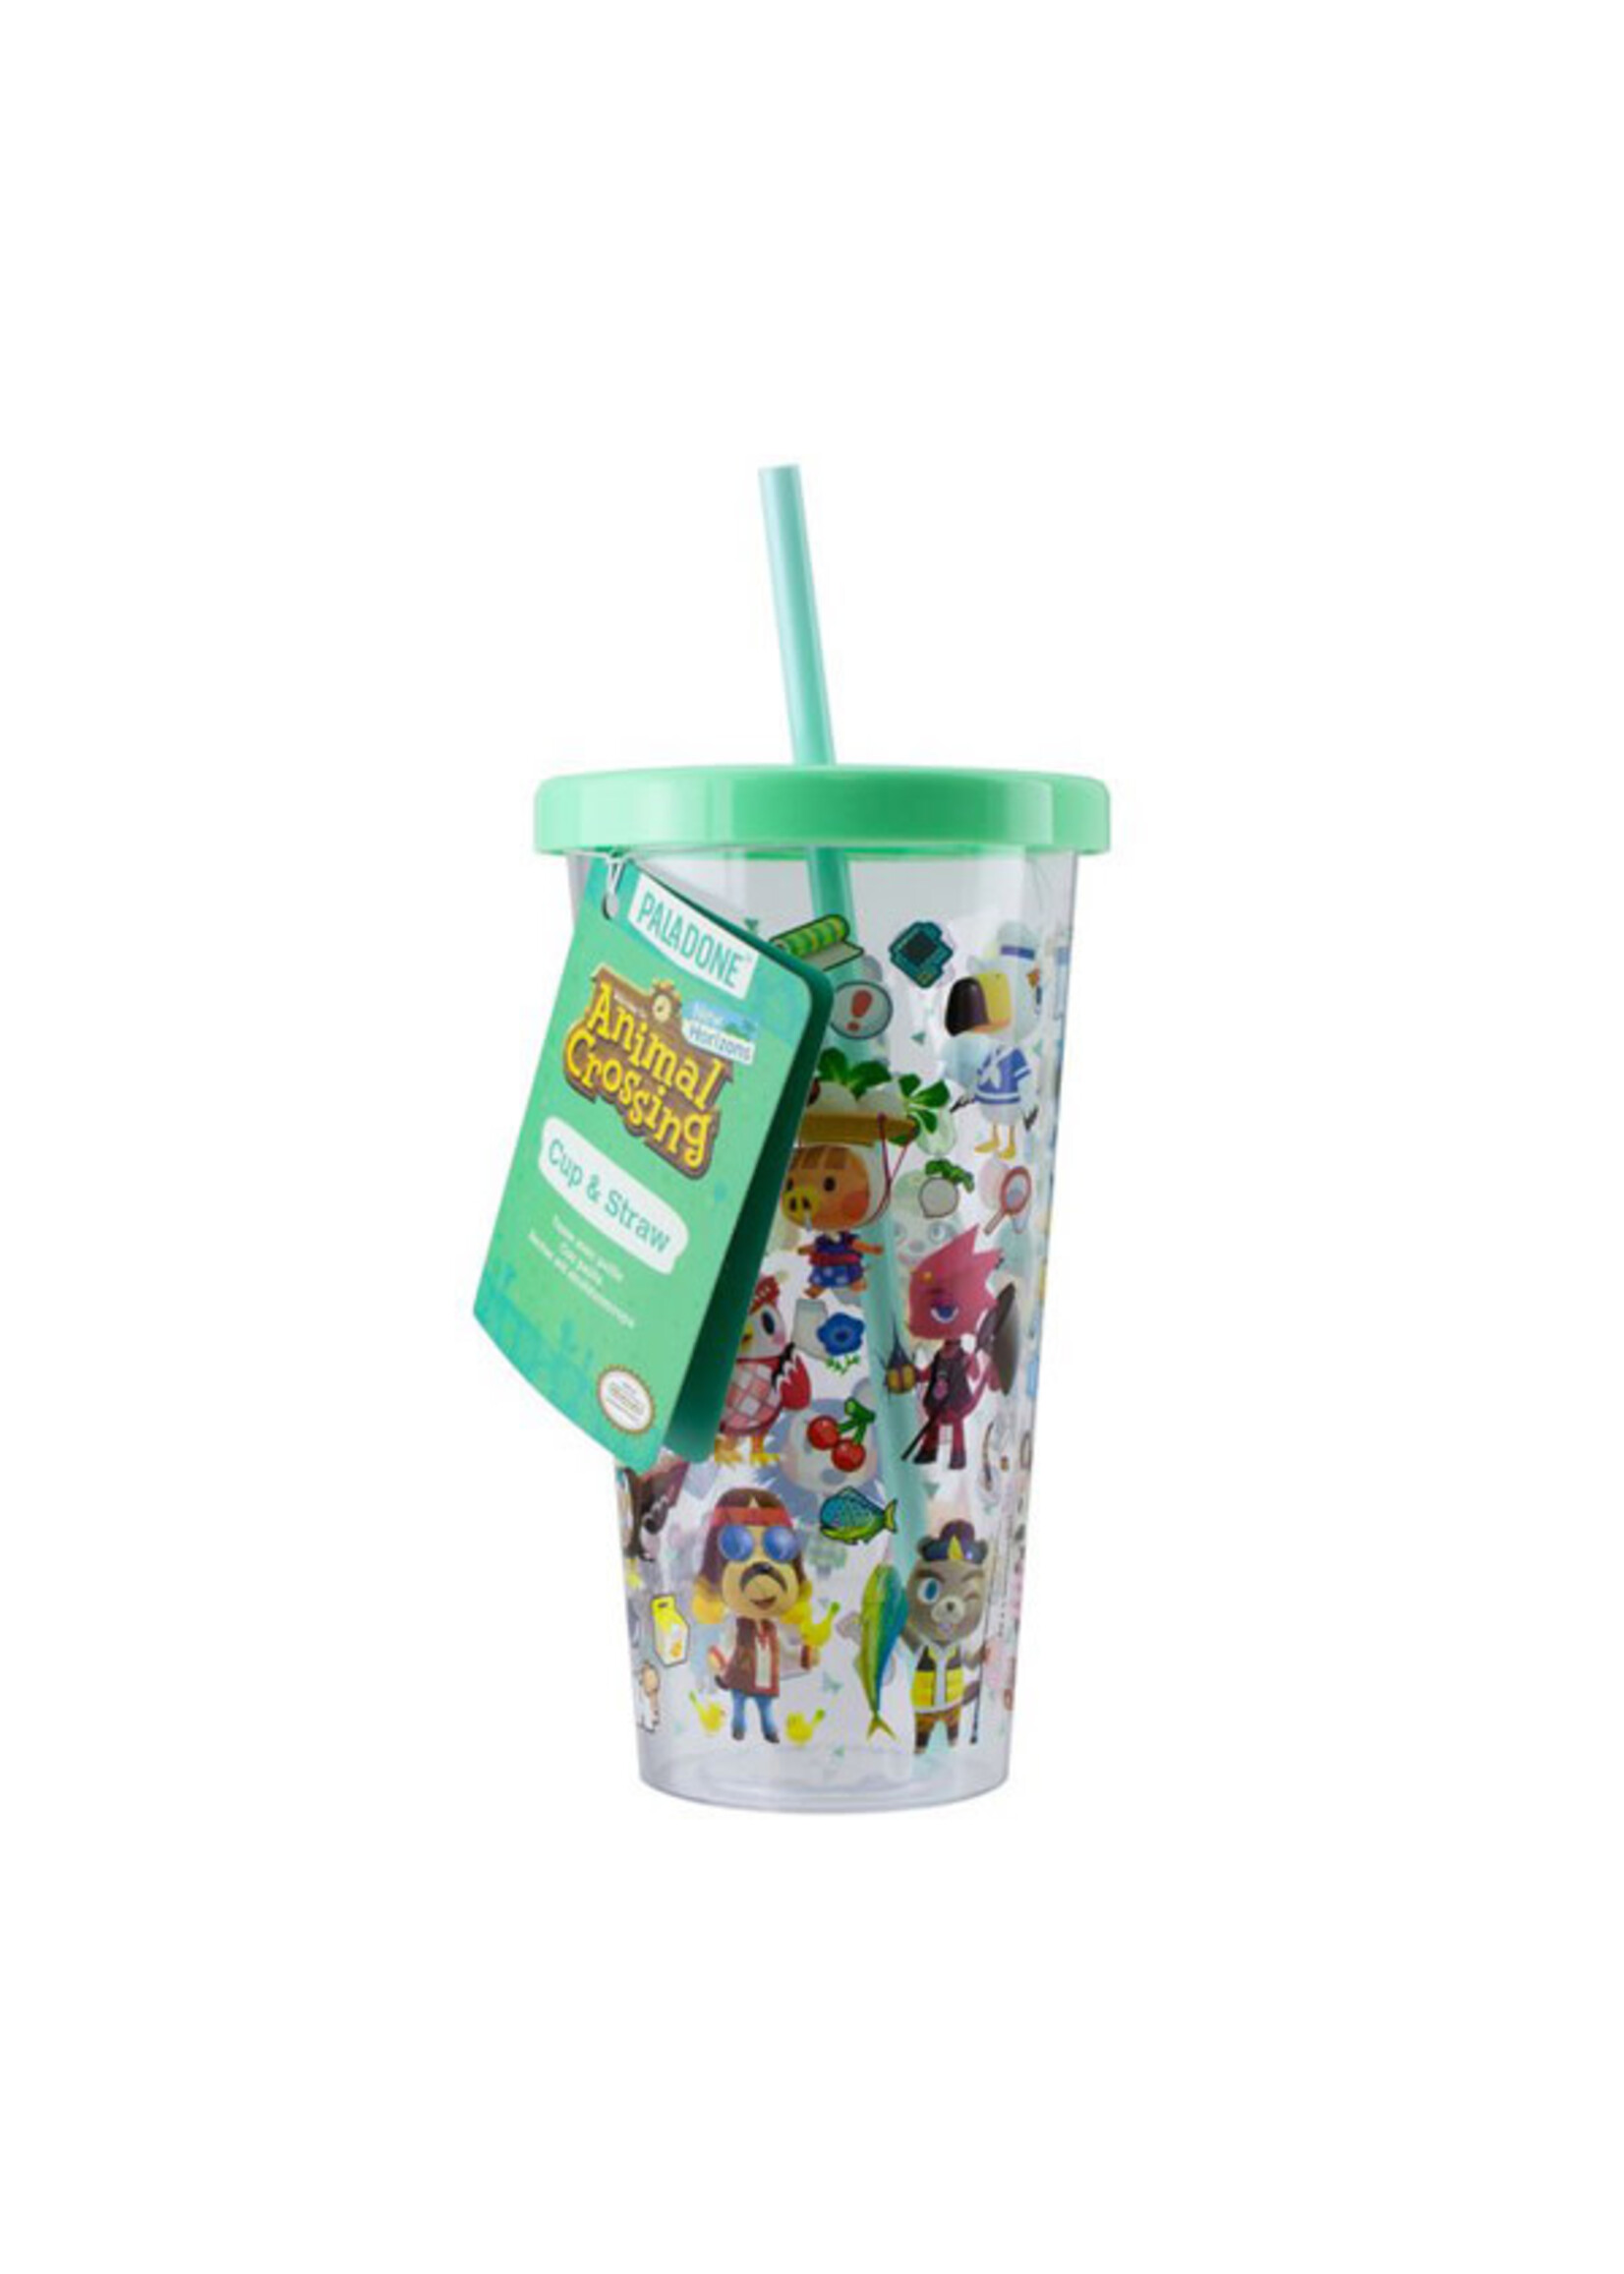 ANIMAL CROSSING CHARACTERS CARNIVAL CUP